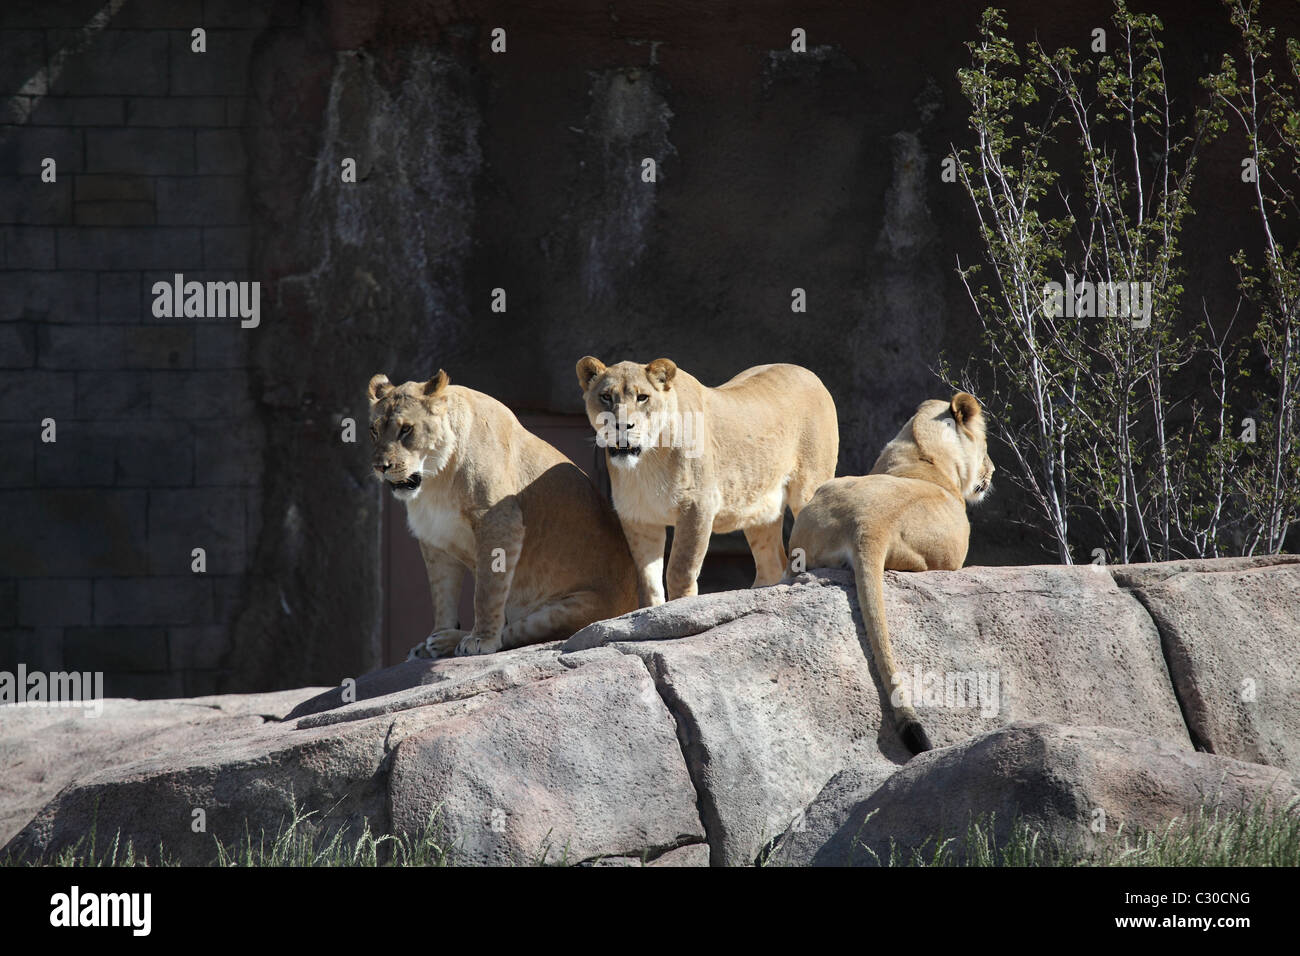 Three sister lionesses displaying different reactions to the camera in a zoo exhibit Stock Photo